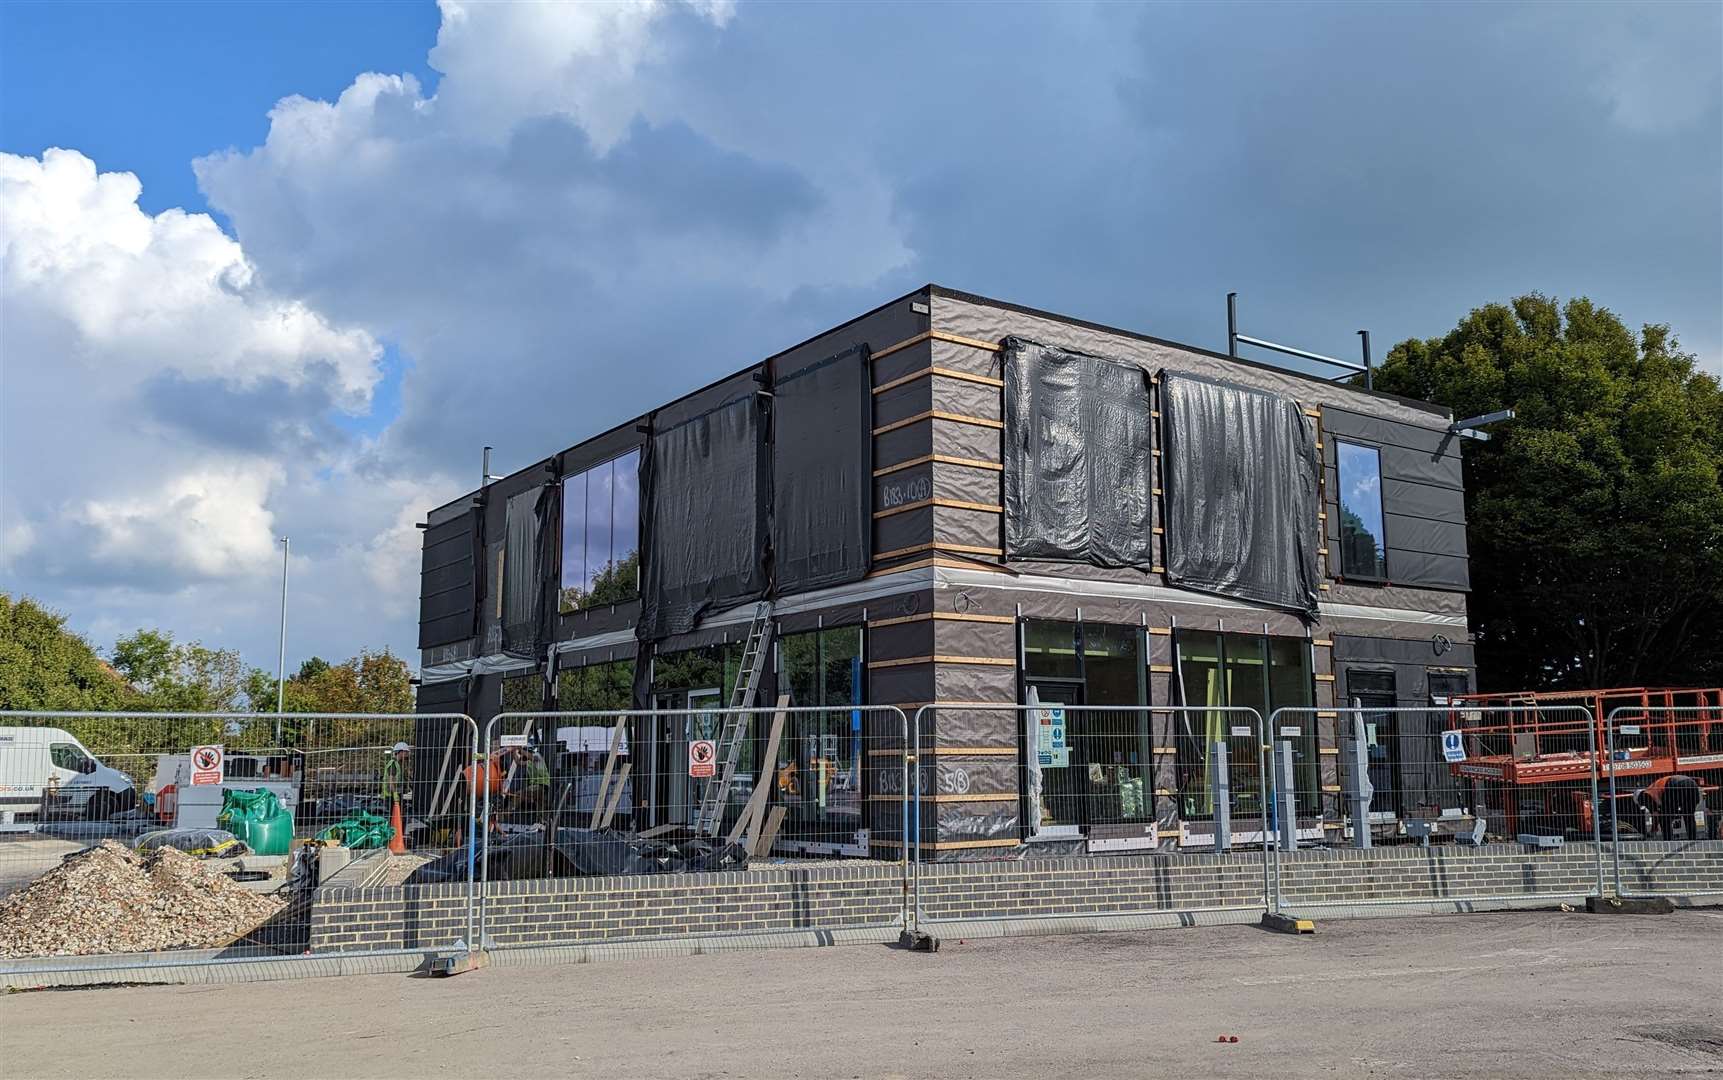 Building work is taking place at the new McDonald's restaurant and drive-thru in the car park of the Tesco supermarket in Cheriton